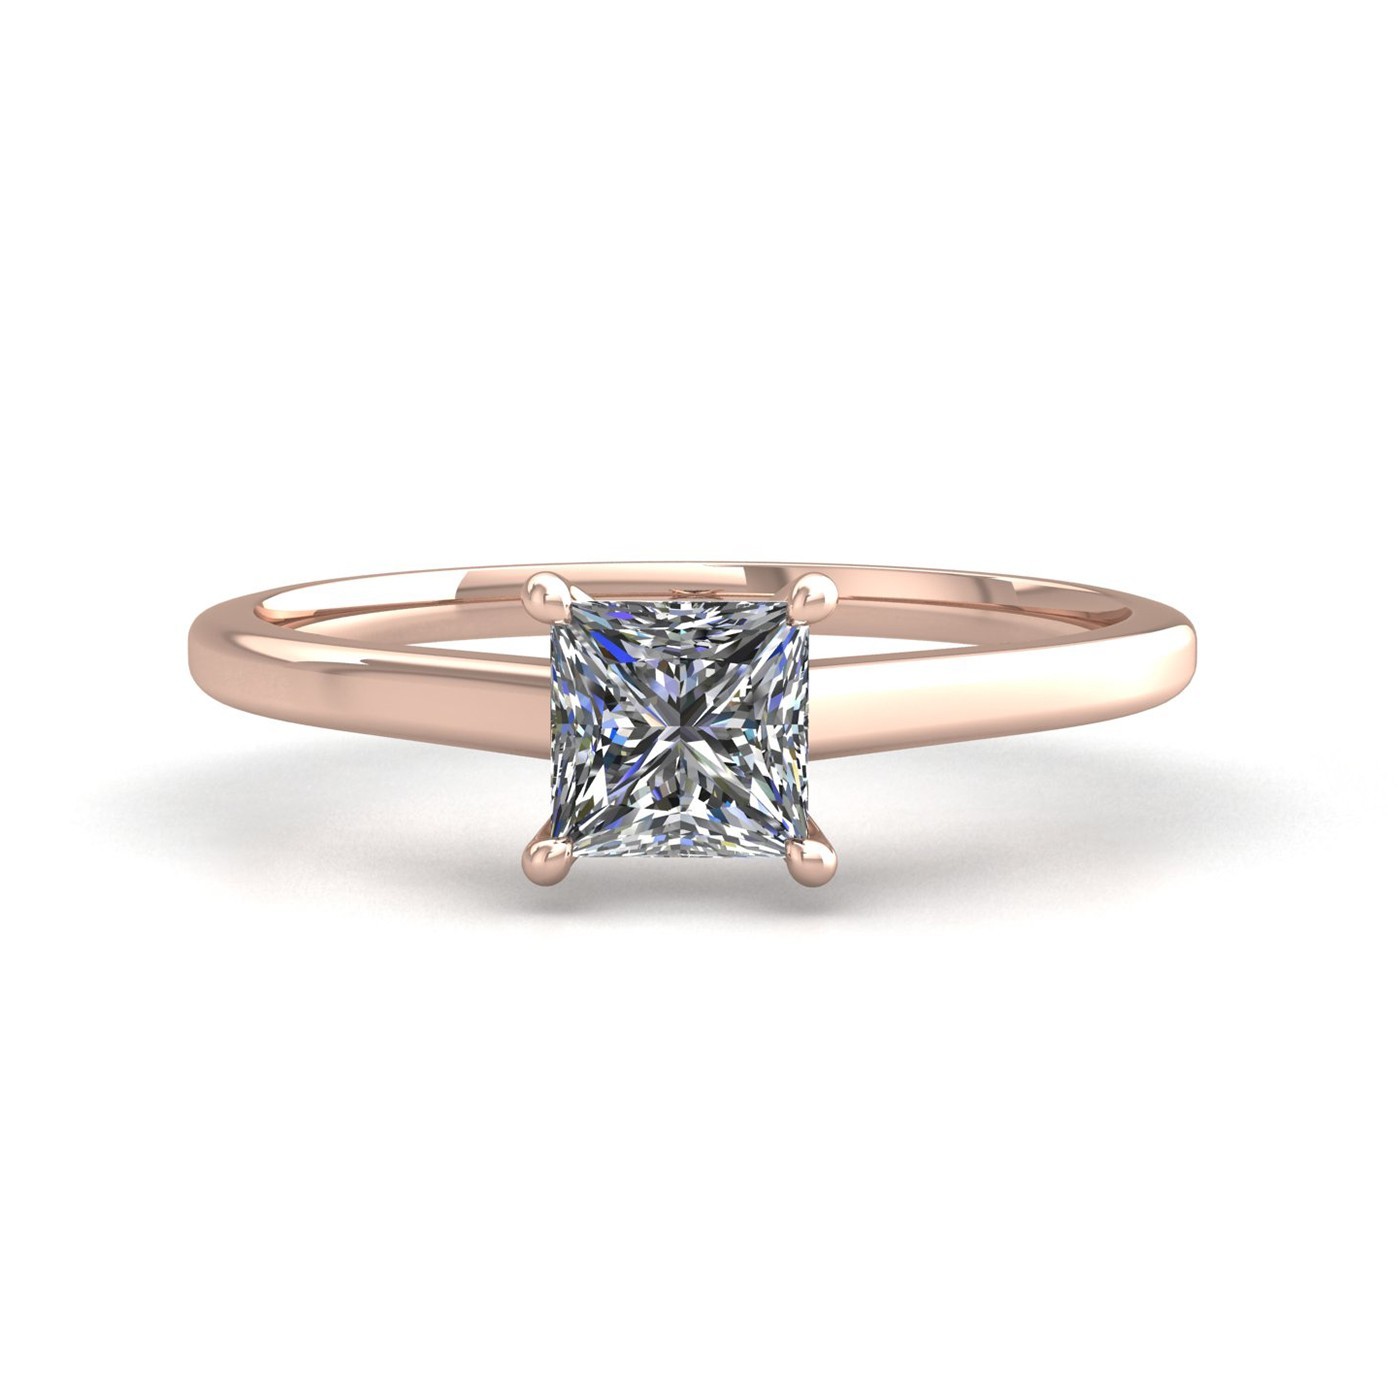 18k rose gold  2,50 ct 4 prongs solitaire princess cut diamond engagement ring with whisper thin band Photos & images